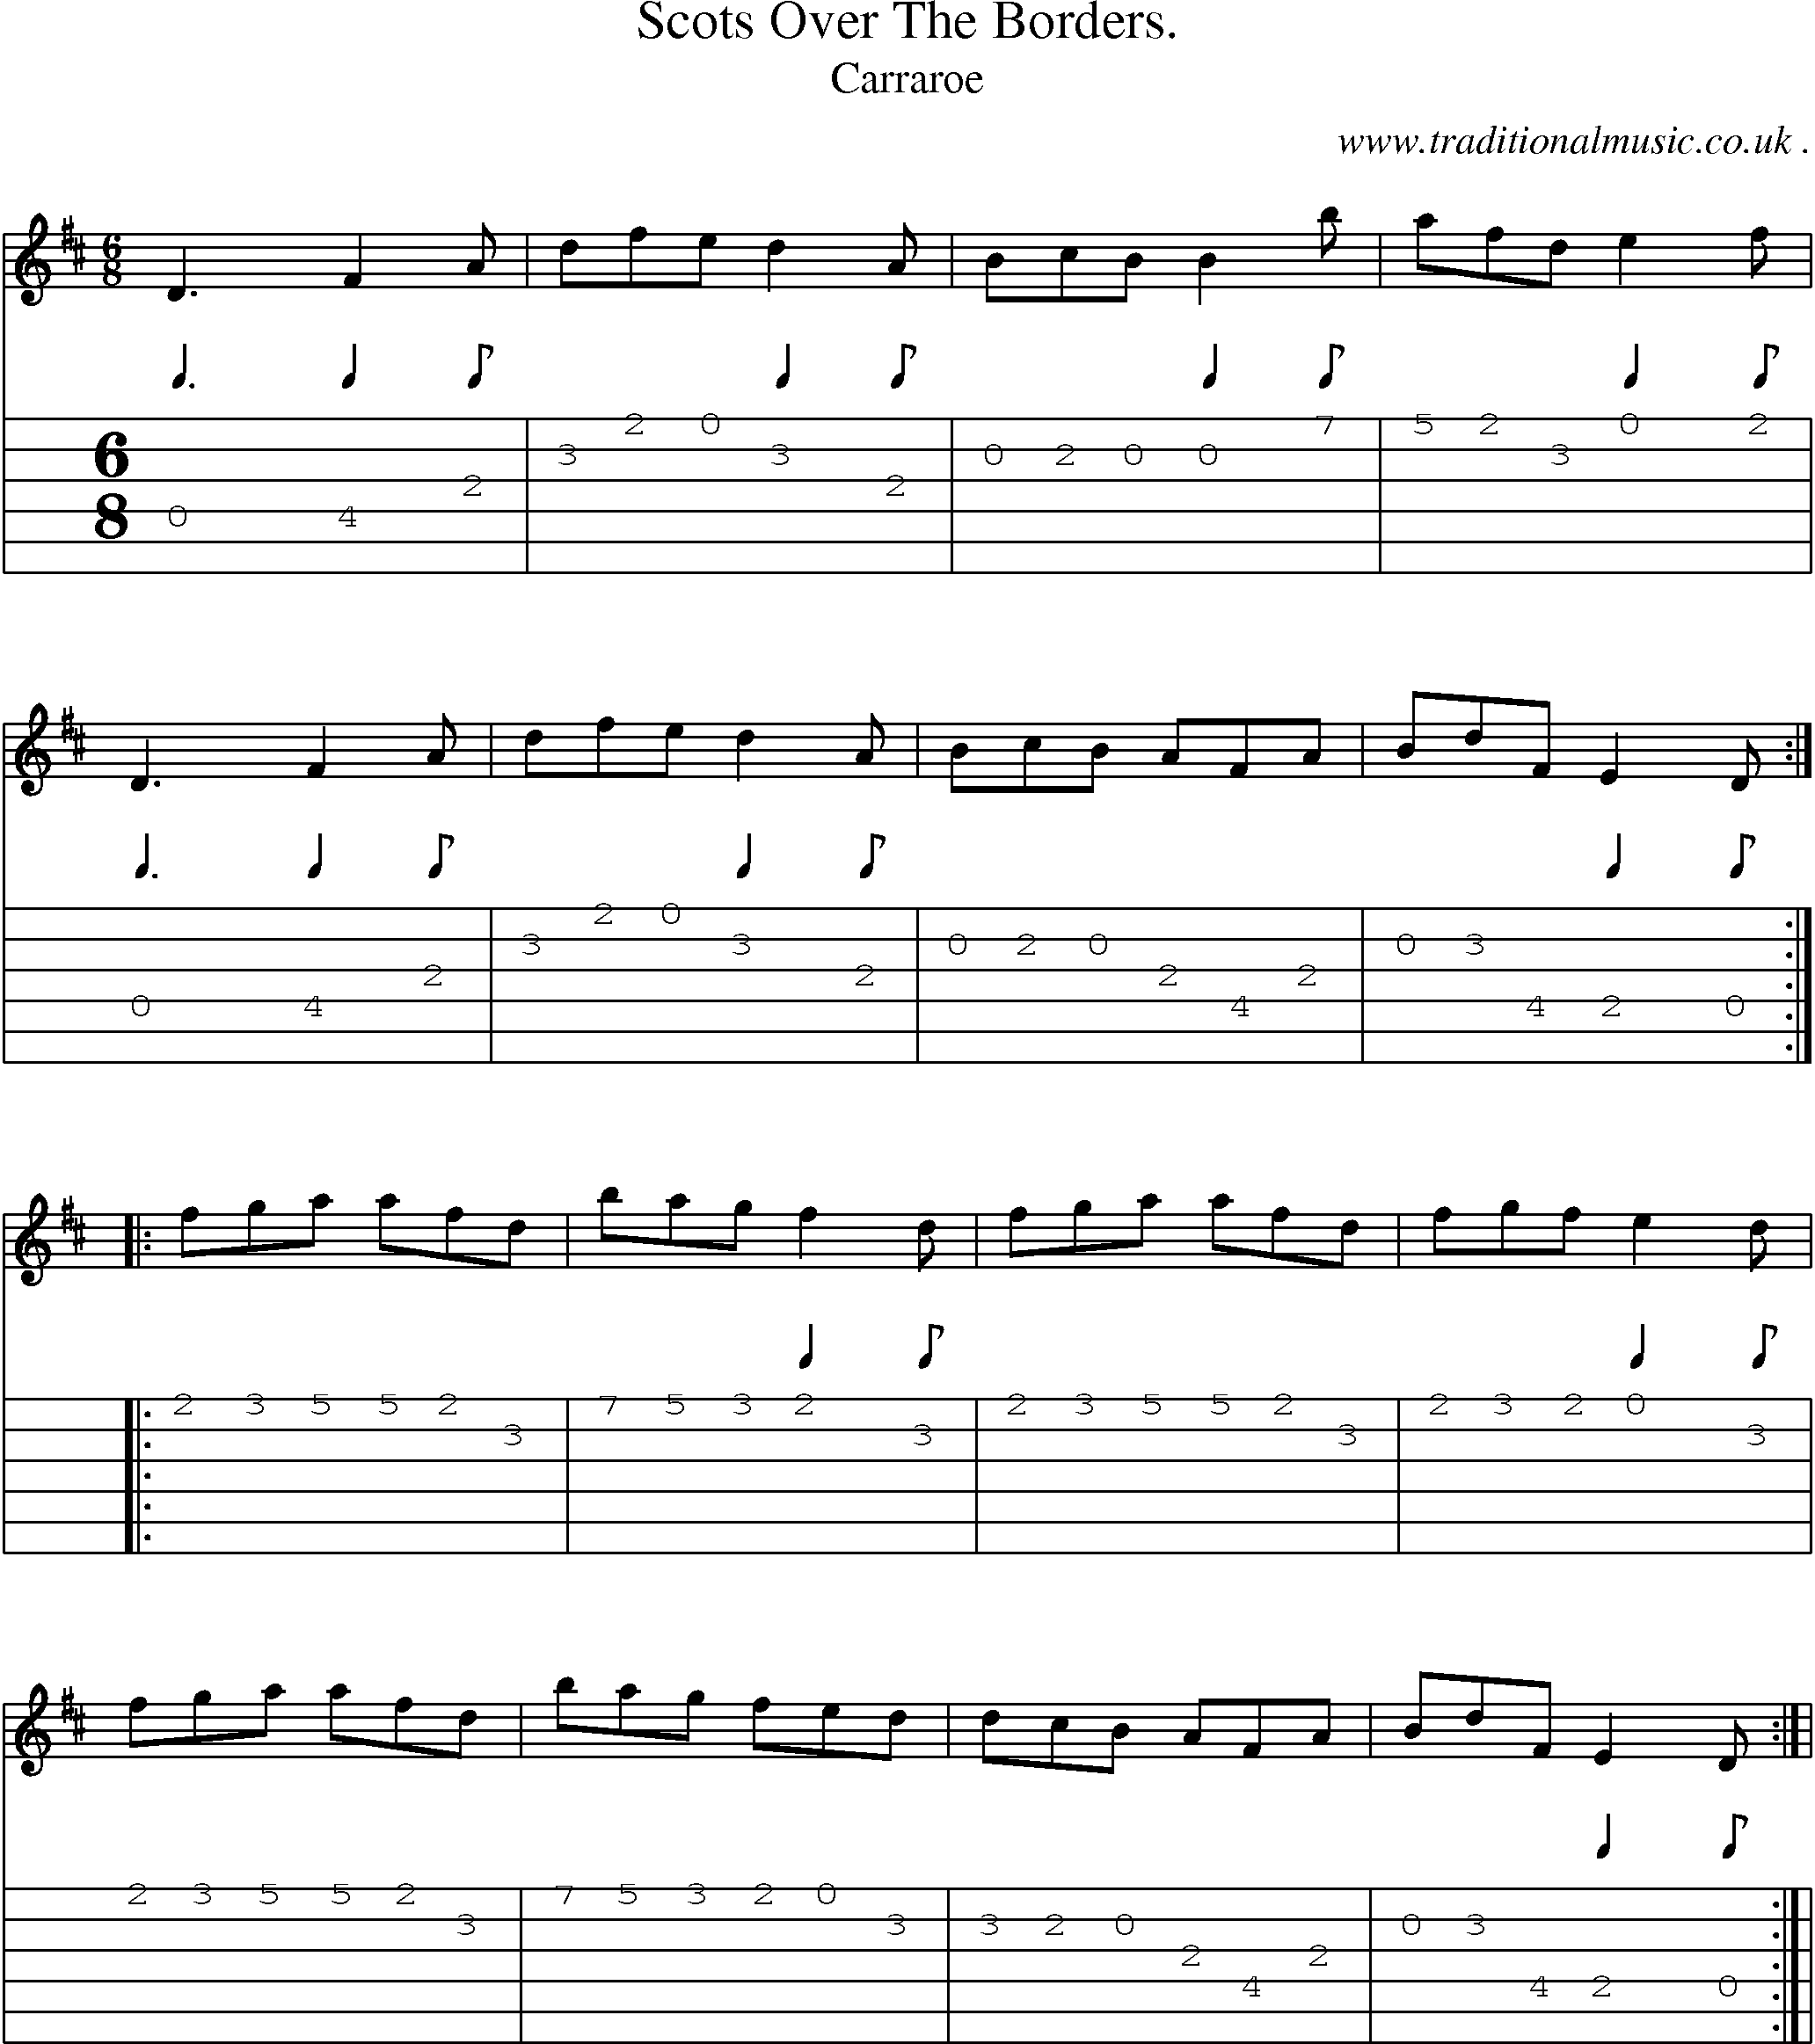 Sheet-Music and Guitar Tabs for Scots Over The Borders